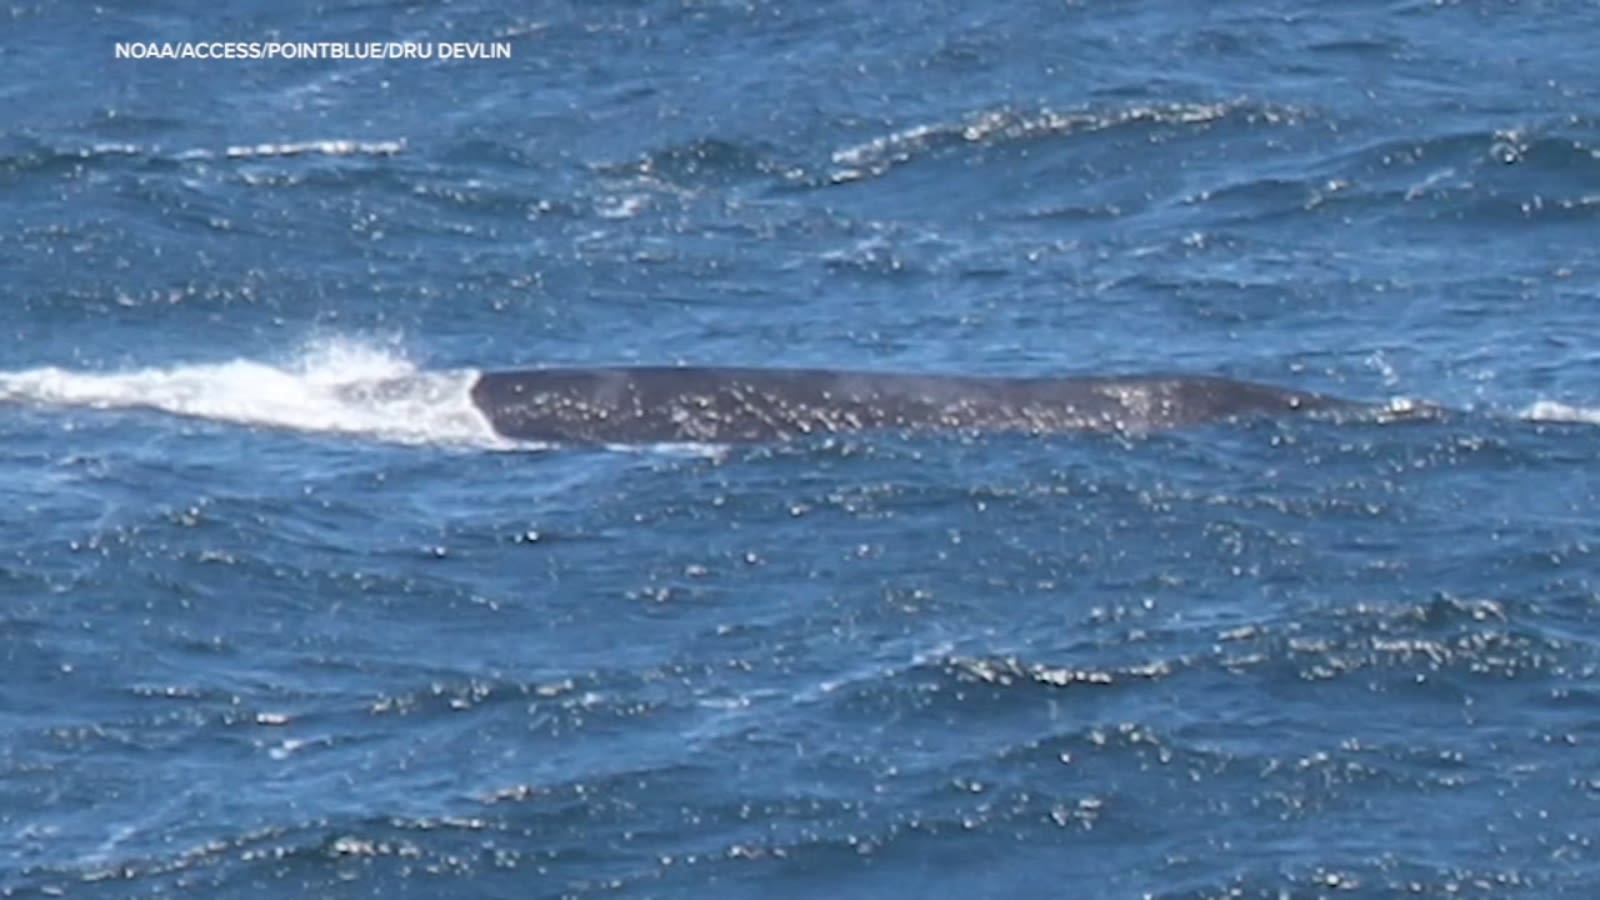 Critically endangered whale spotted off coast of Marin County, NOAA confirms